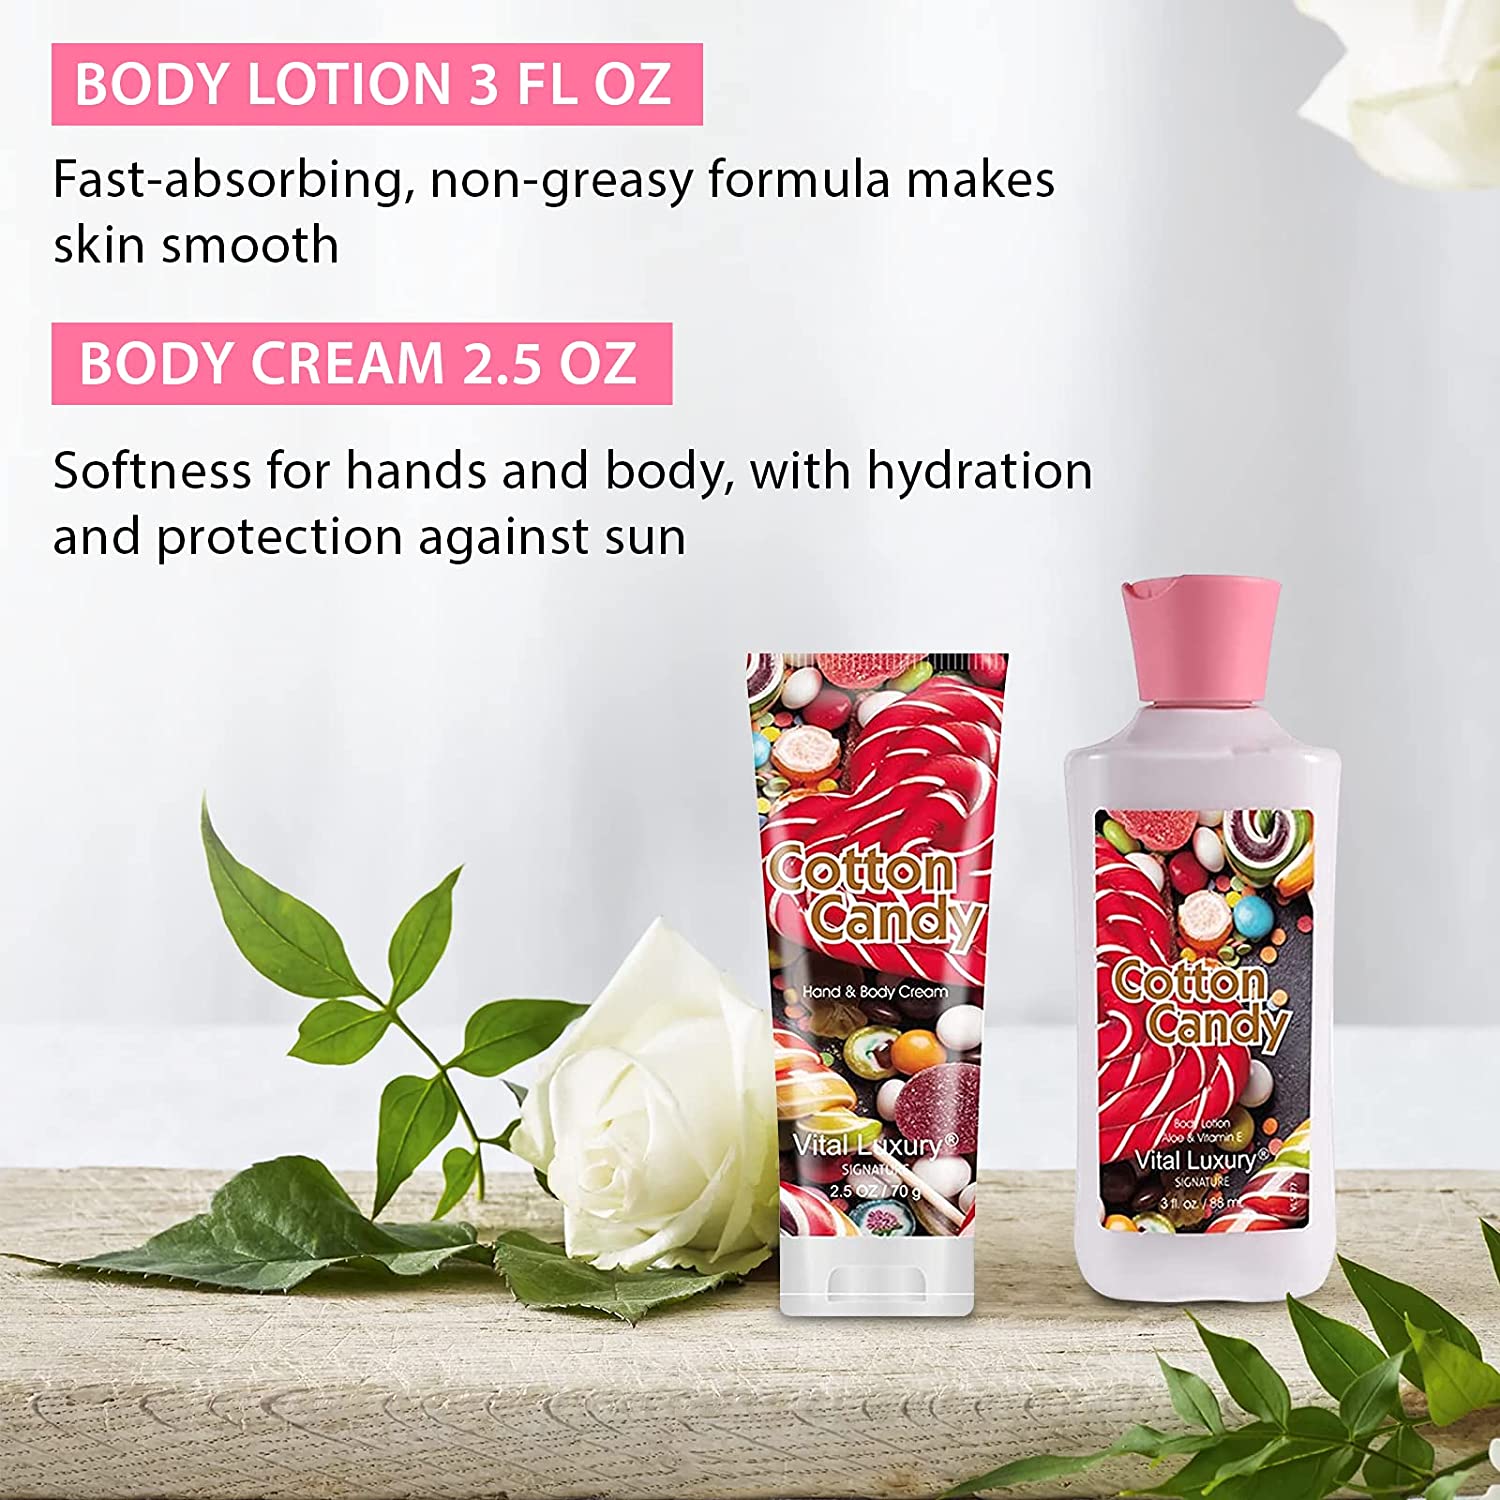 Vital Luxury Cotton Candy Bath & Body Kit, 3 Fl Oz, Ideal Skincare Gift Home Spa Set, Includes Body Lotion, Shower Gel, Body Cream, and Fragrance Mist